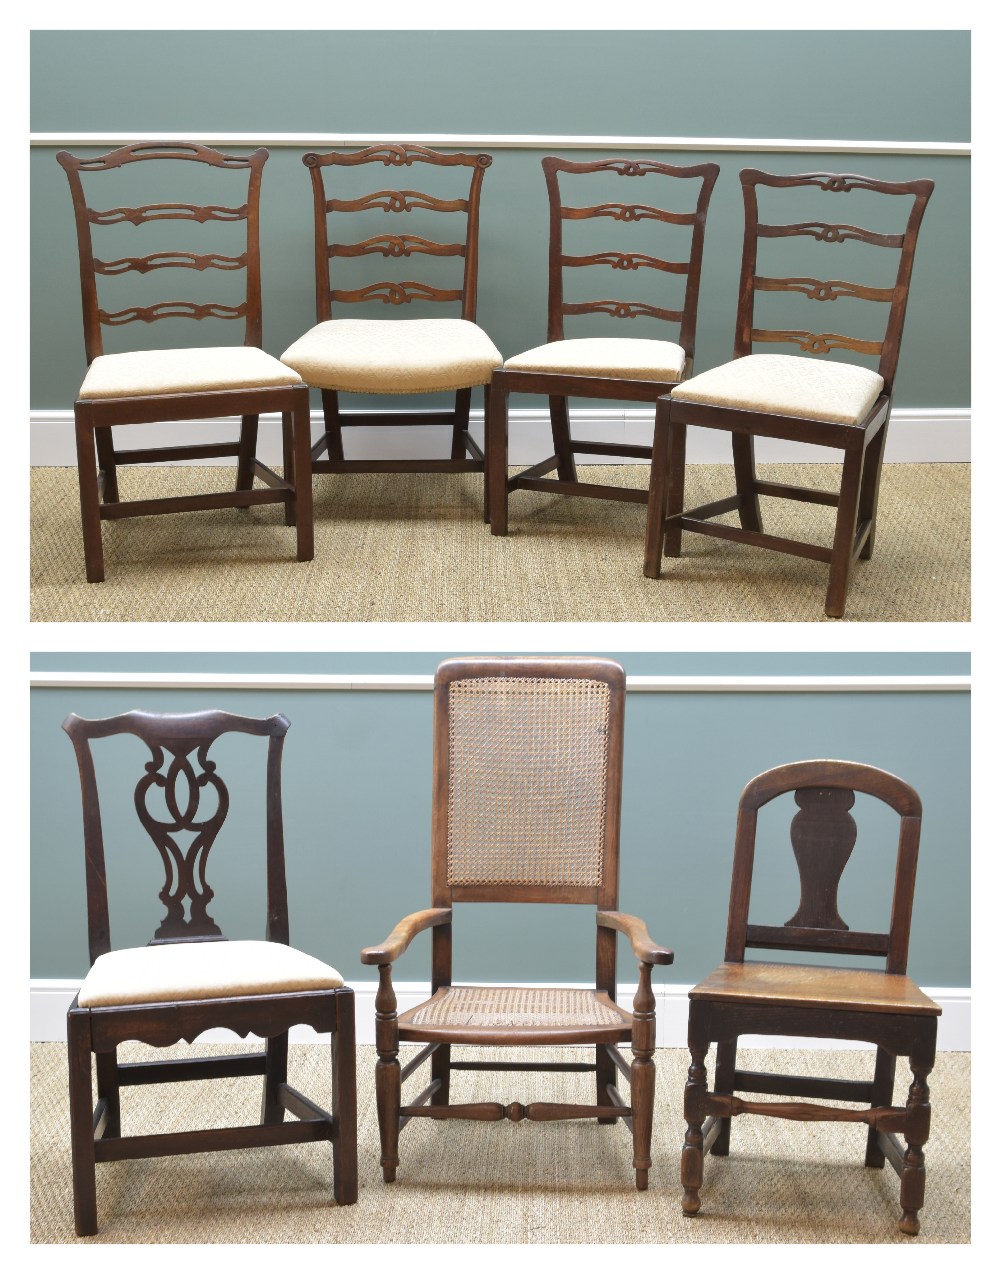 ASSORTED DINING CHAIRS including four ladderback dining chair, a Chippendale-style chair, all with